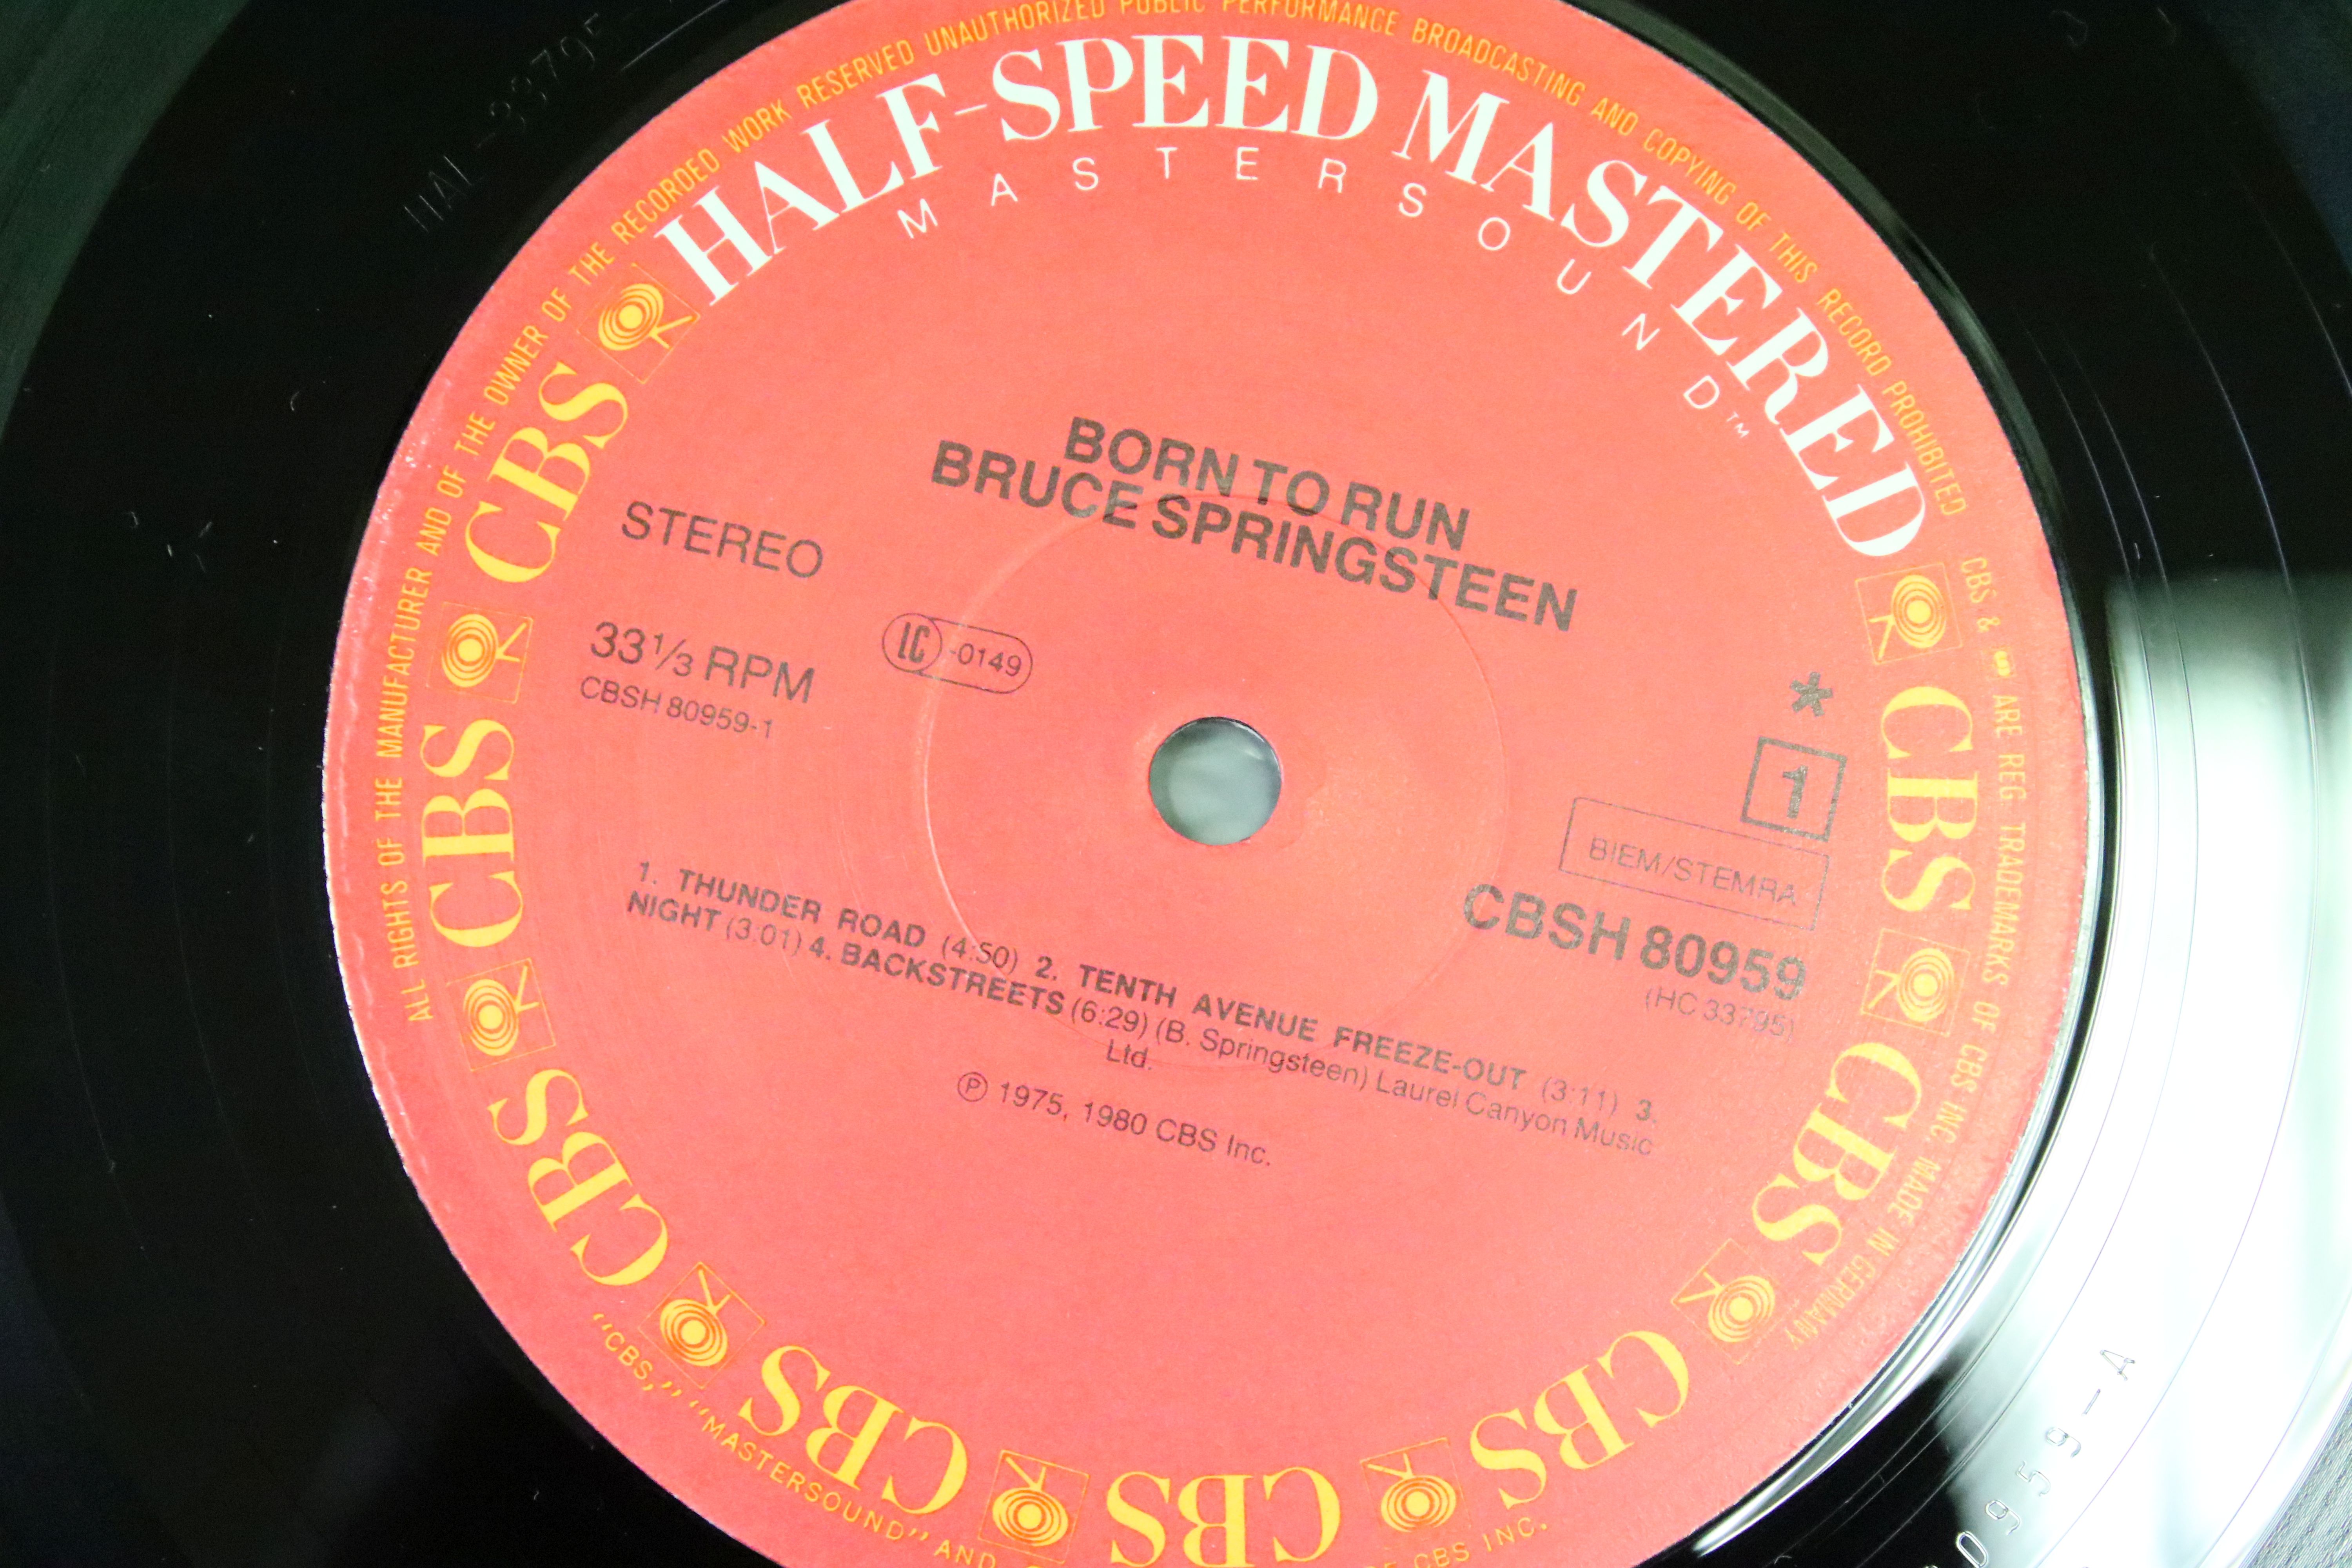 Vinyl / Autograph - 2 Bruce Springsteen Half Speed Mastered albums to include: Born To Run (CBS - Image 4 of 9